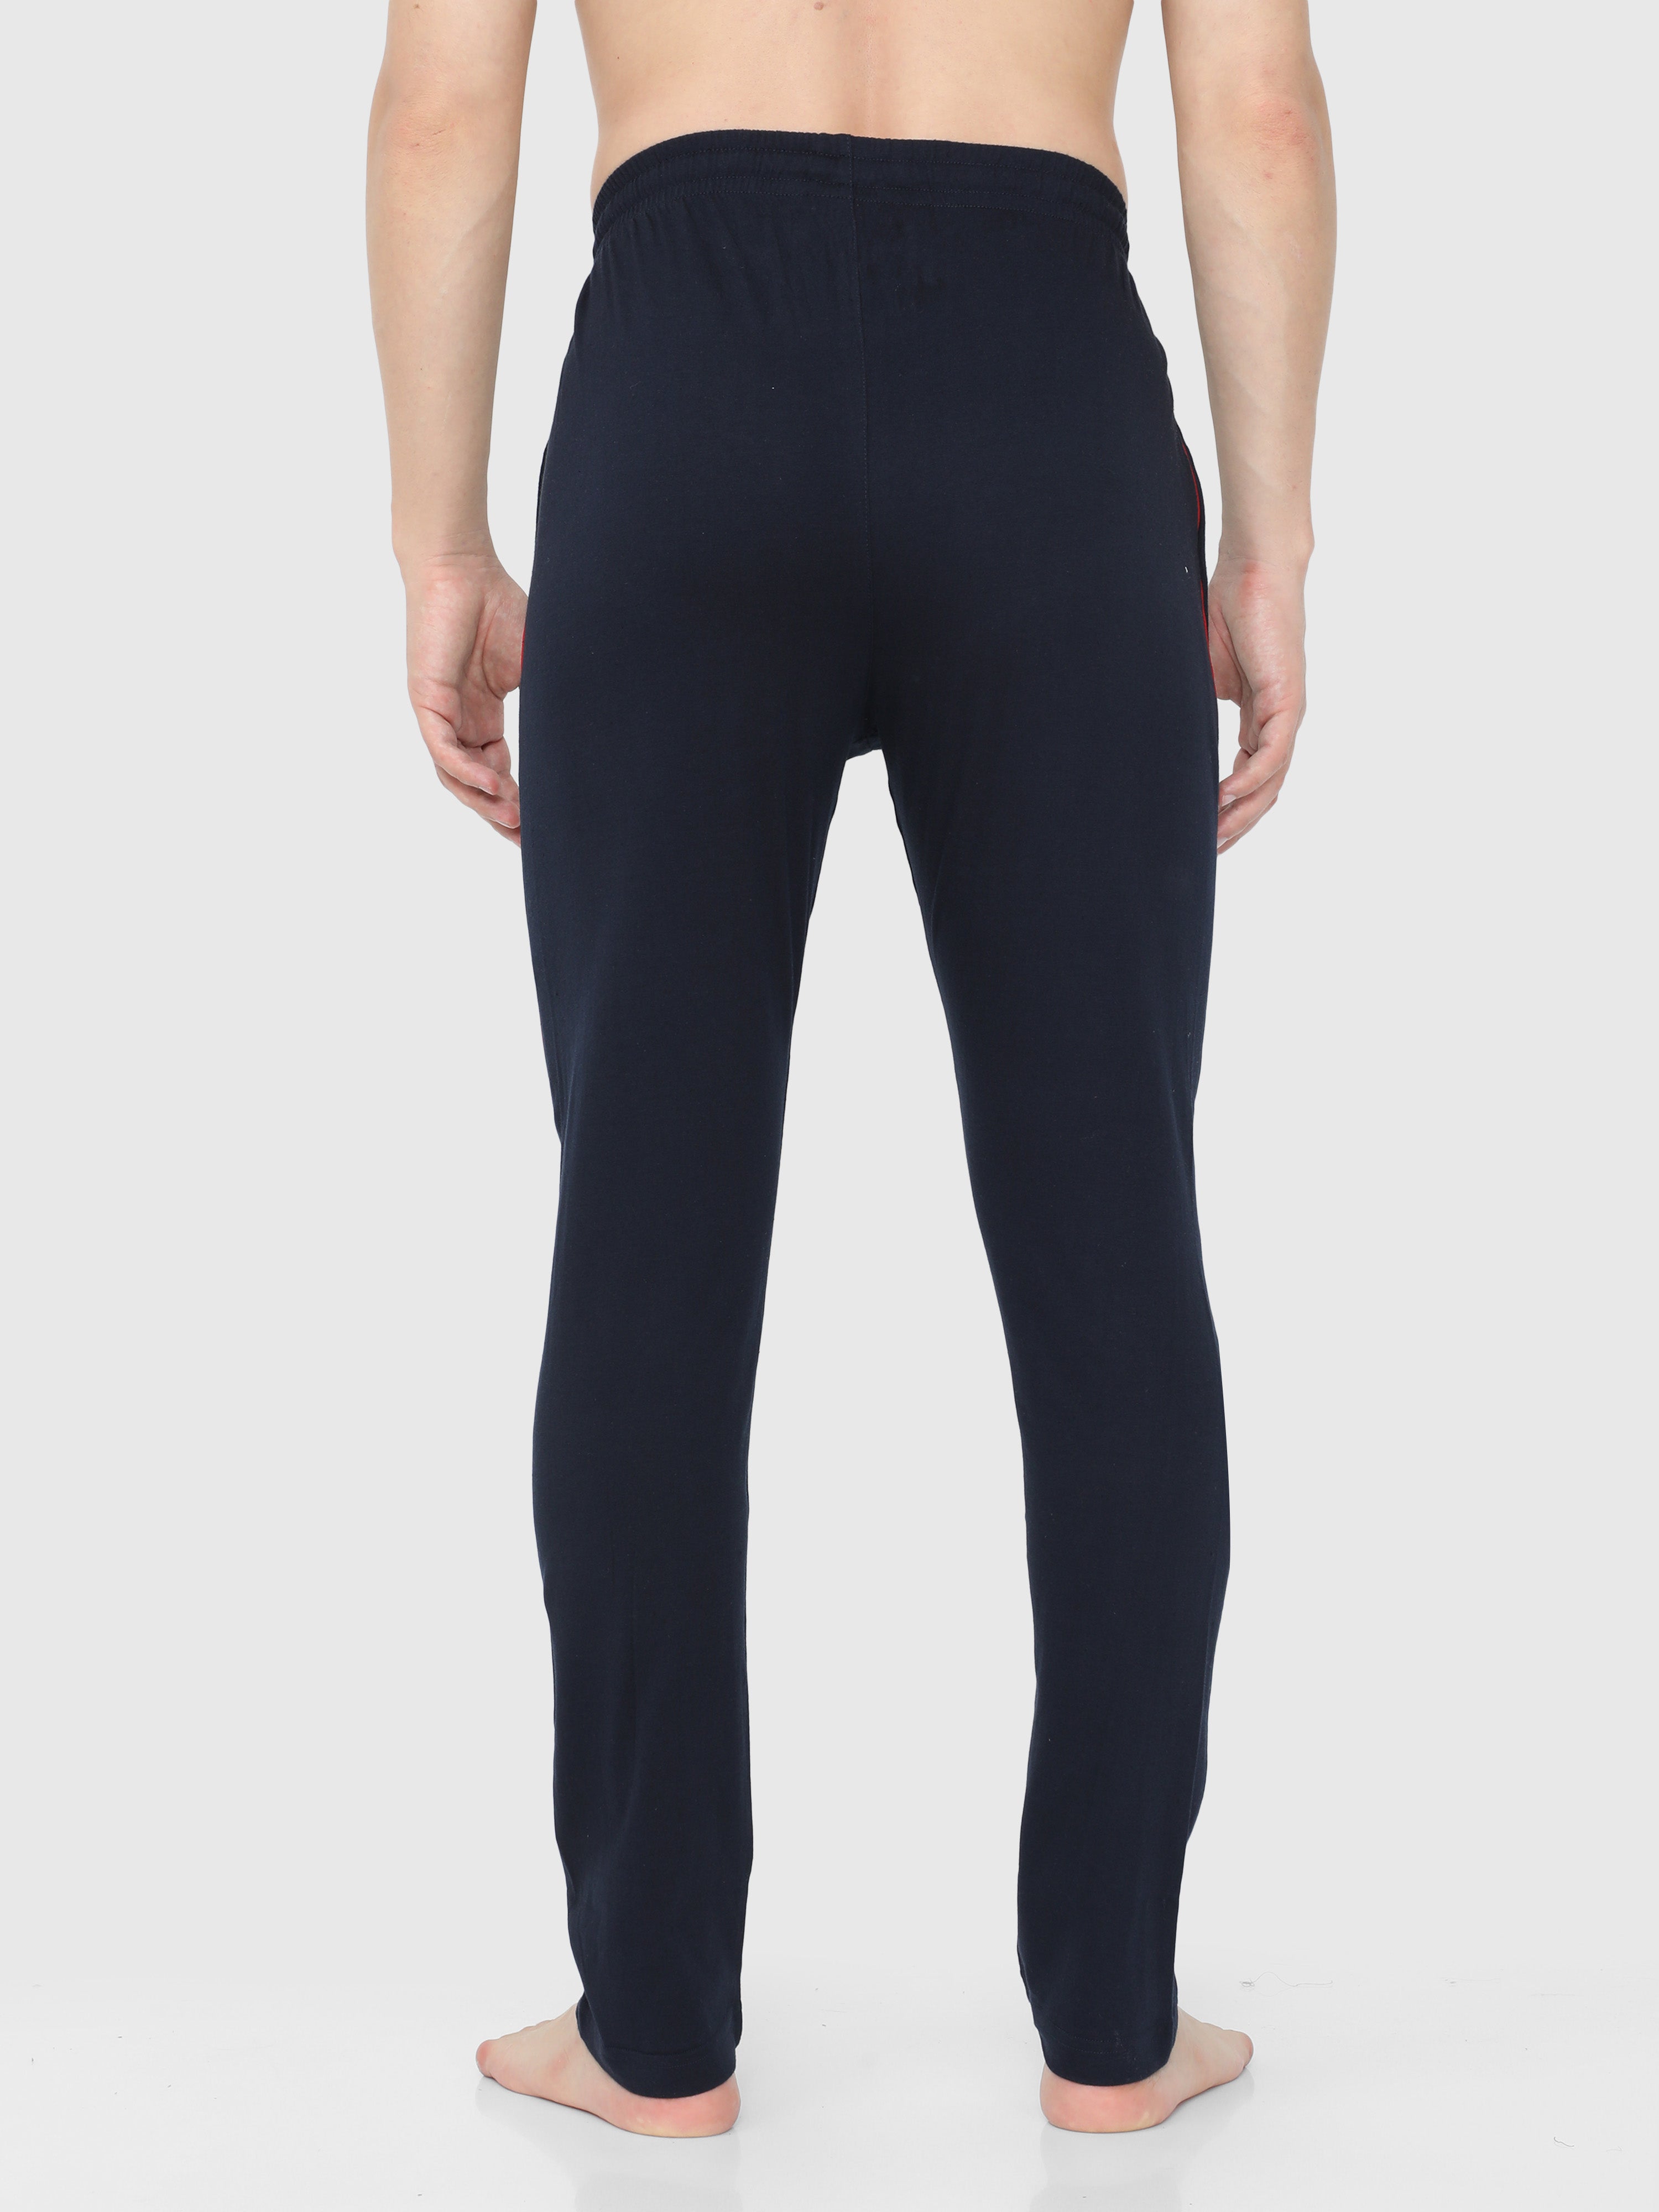 Buy For Mens Track Pants Online At Best Prices - Bodycare